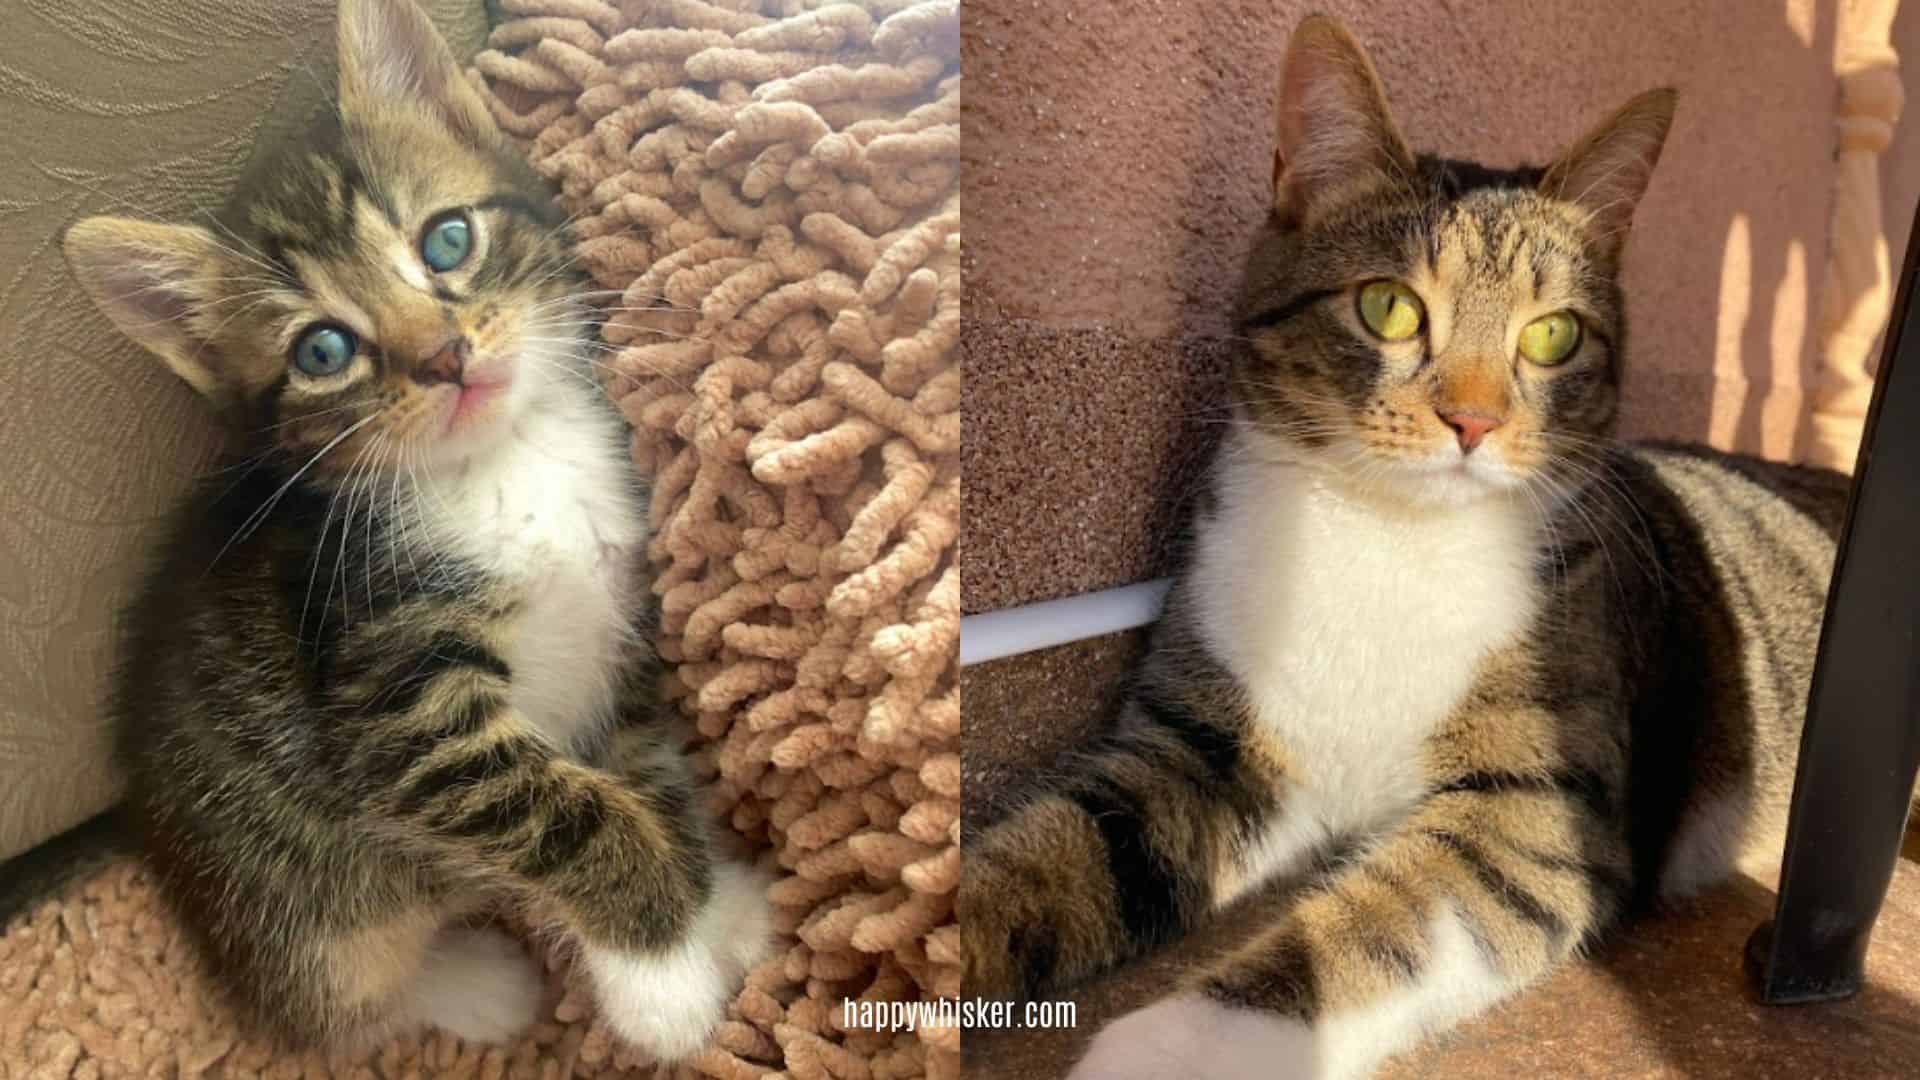 side by side comparison of a kitten and a fully grown cat